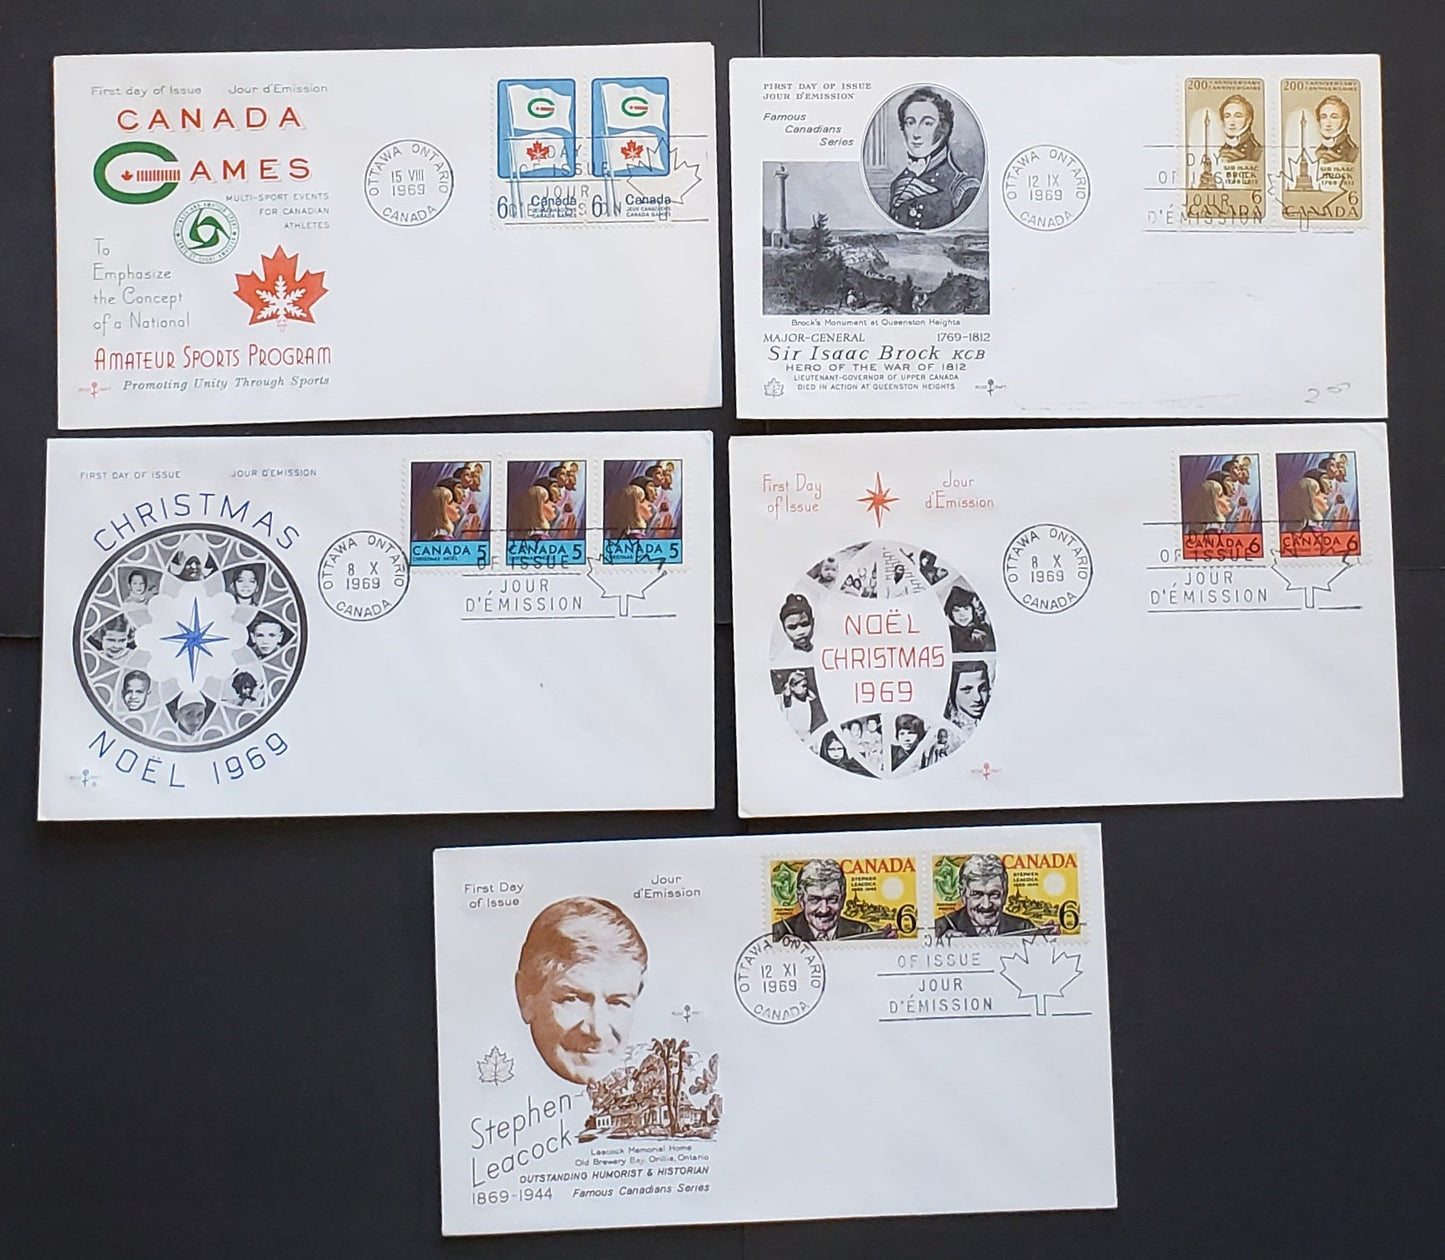 Lot 95 Canada #493, 495-i, 496, 499, 500-504 5c-6c Multicolored Various Subjects 1969 Commemoratives, 10 Rosecraft FDC's Franked With Pairs, HB, HF and DF Papers, Cat. Value $28